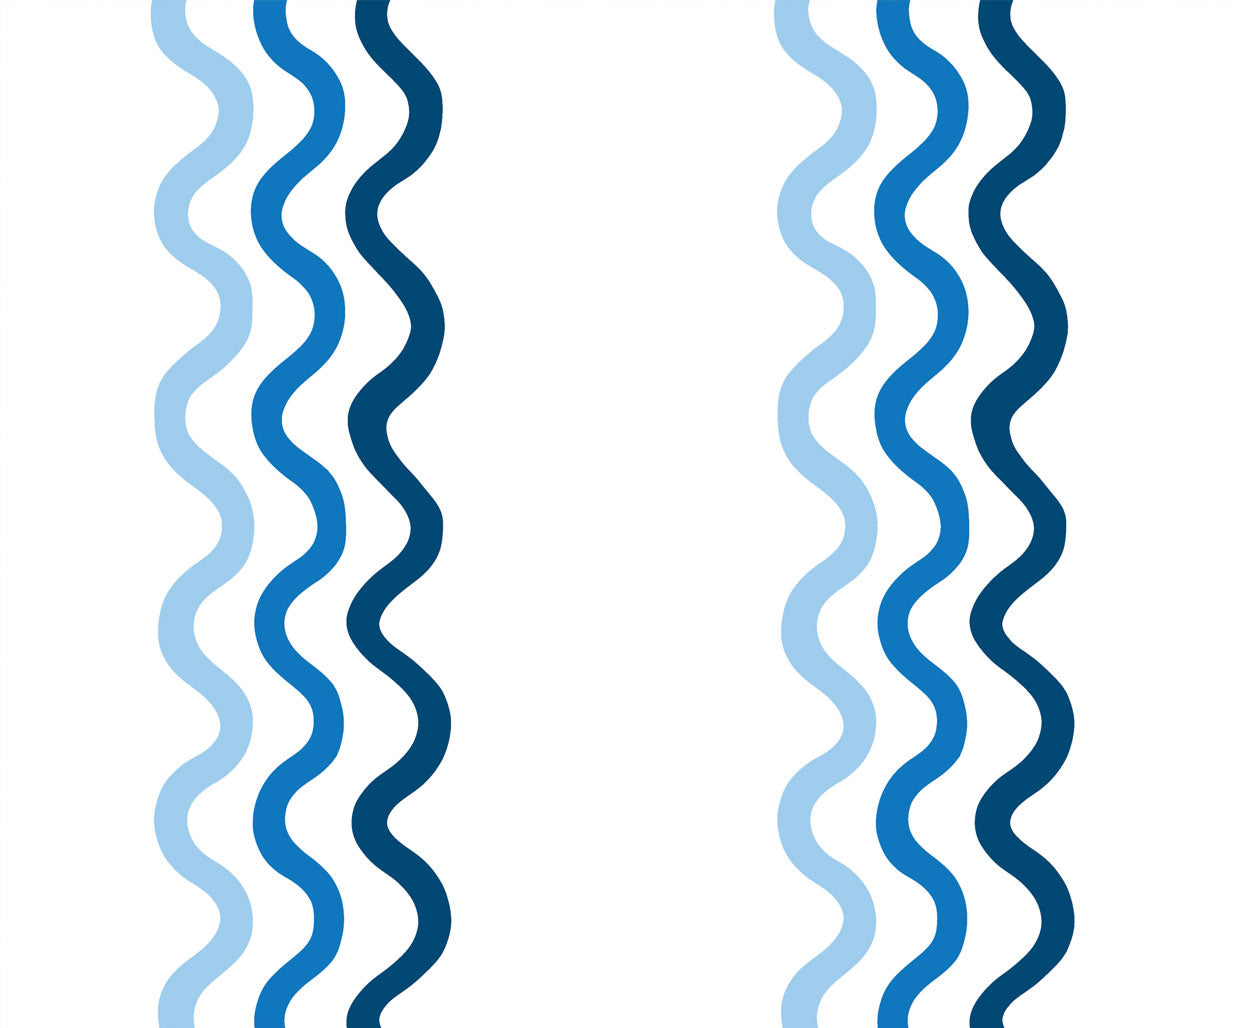 Detail of fabric in a wavy stripe print in blue and navy on a white field.